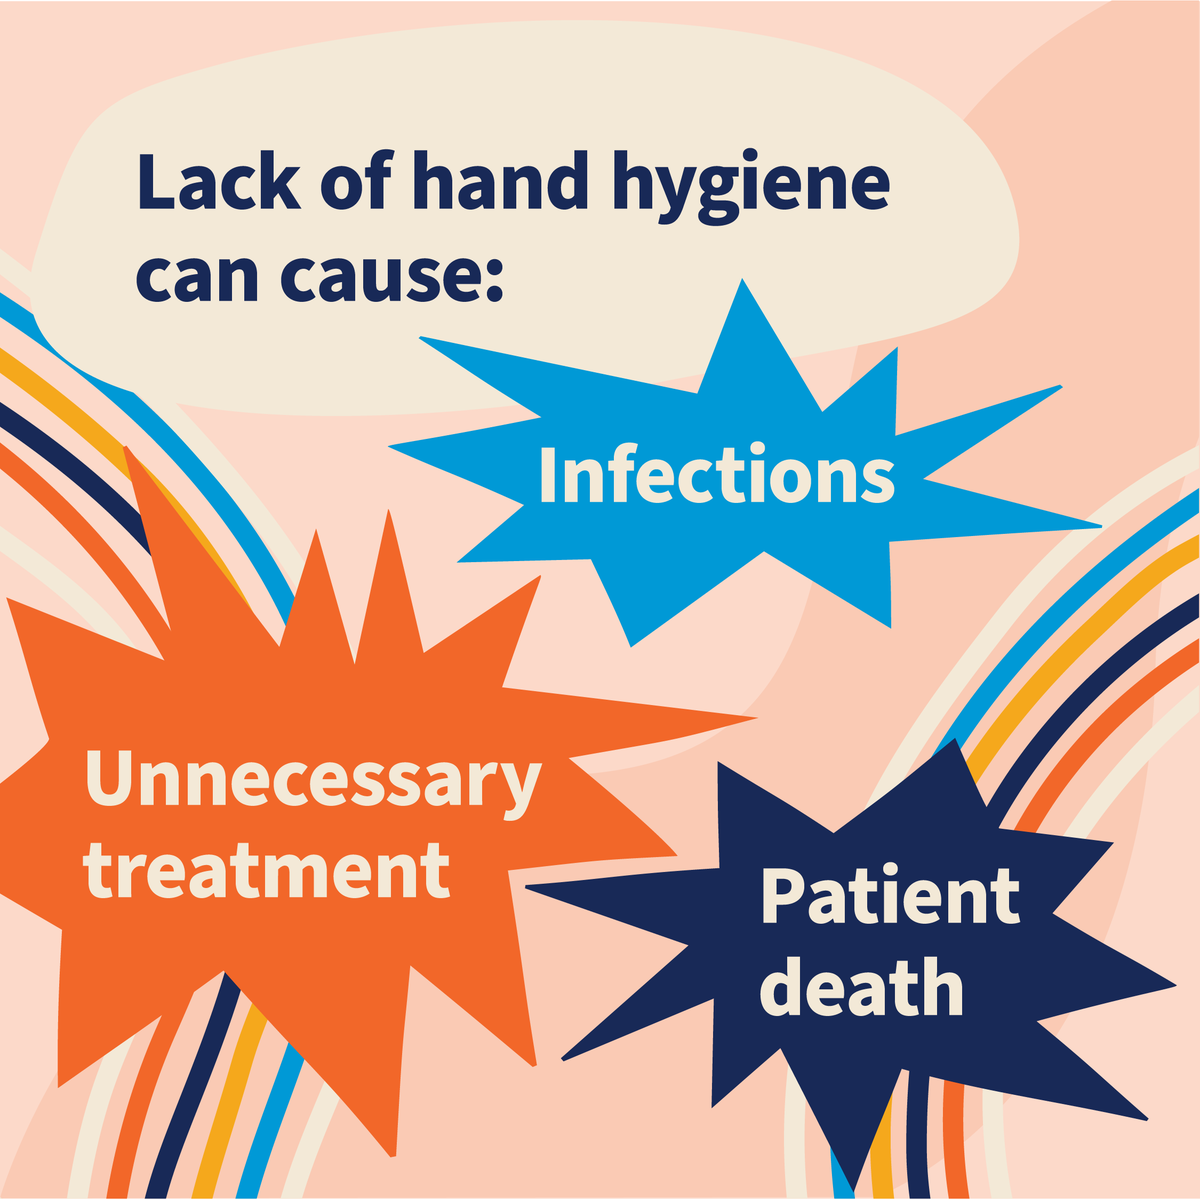 Lack of hand hygiene can cause: